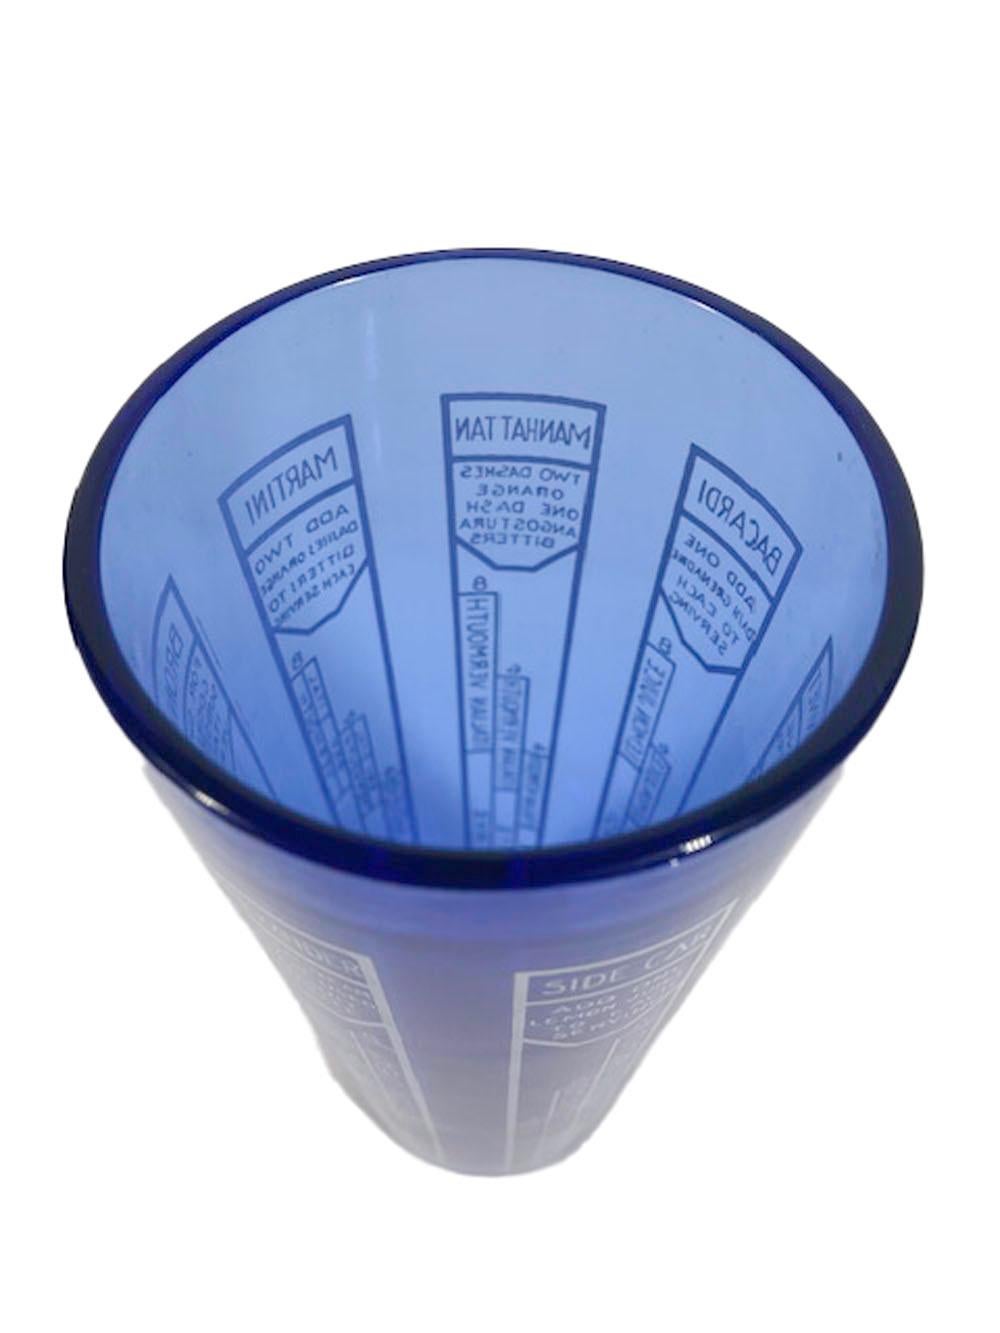 Cobalt blue glass, Art Deco period cocktail shaker with chrome lid and decorated in white with cocktail recipes.